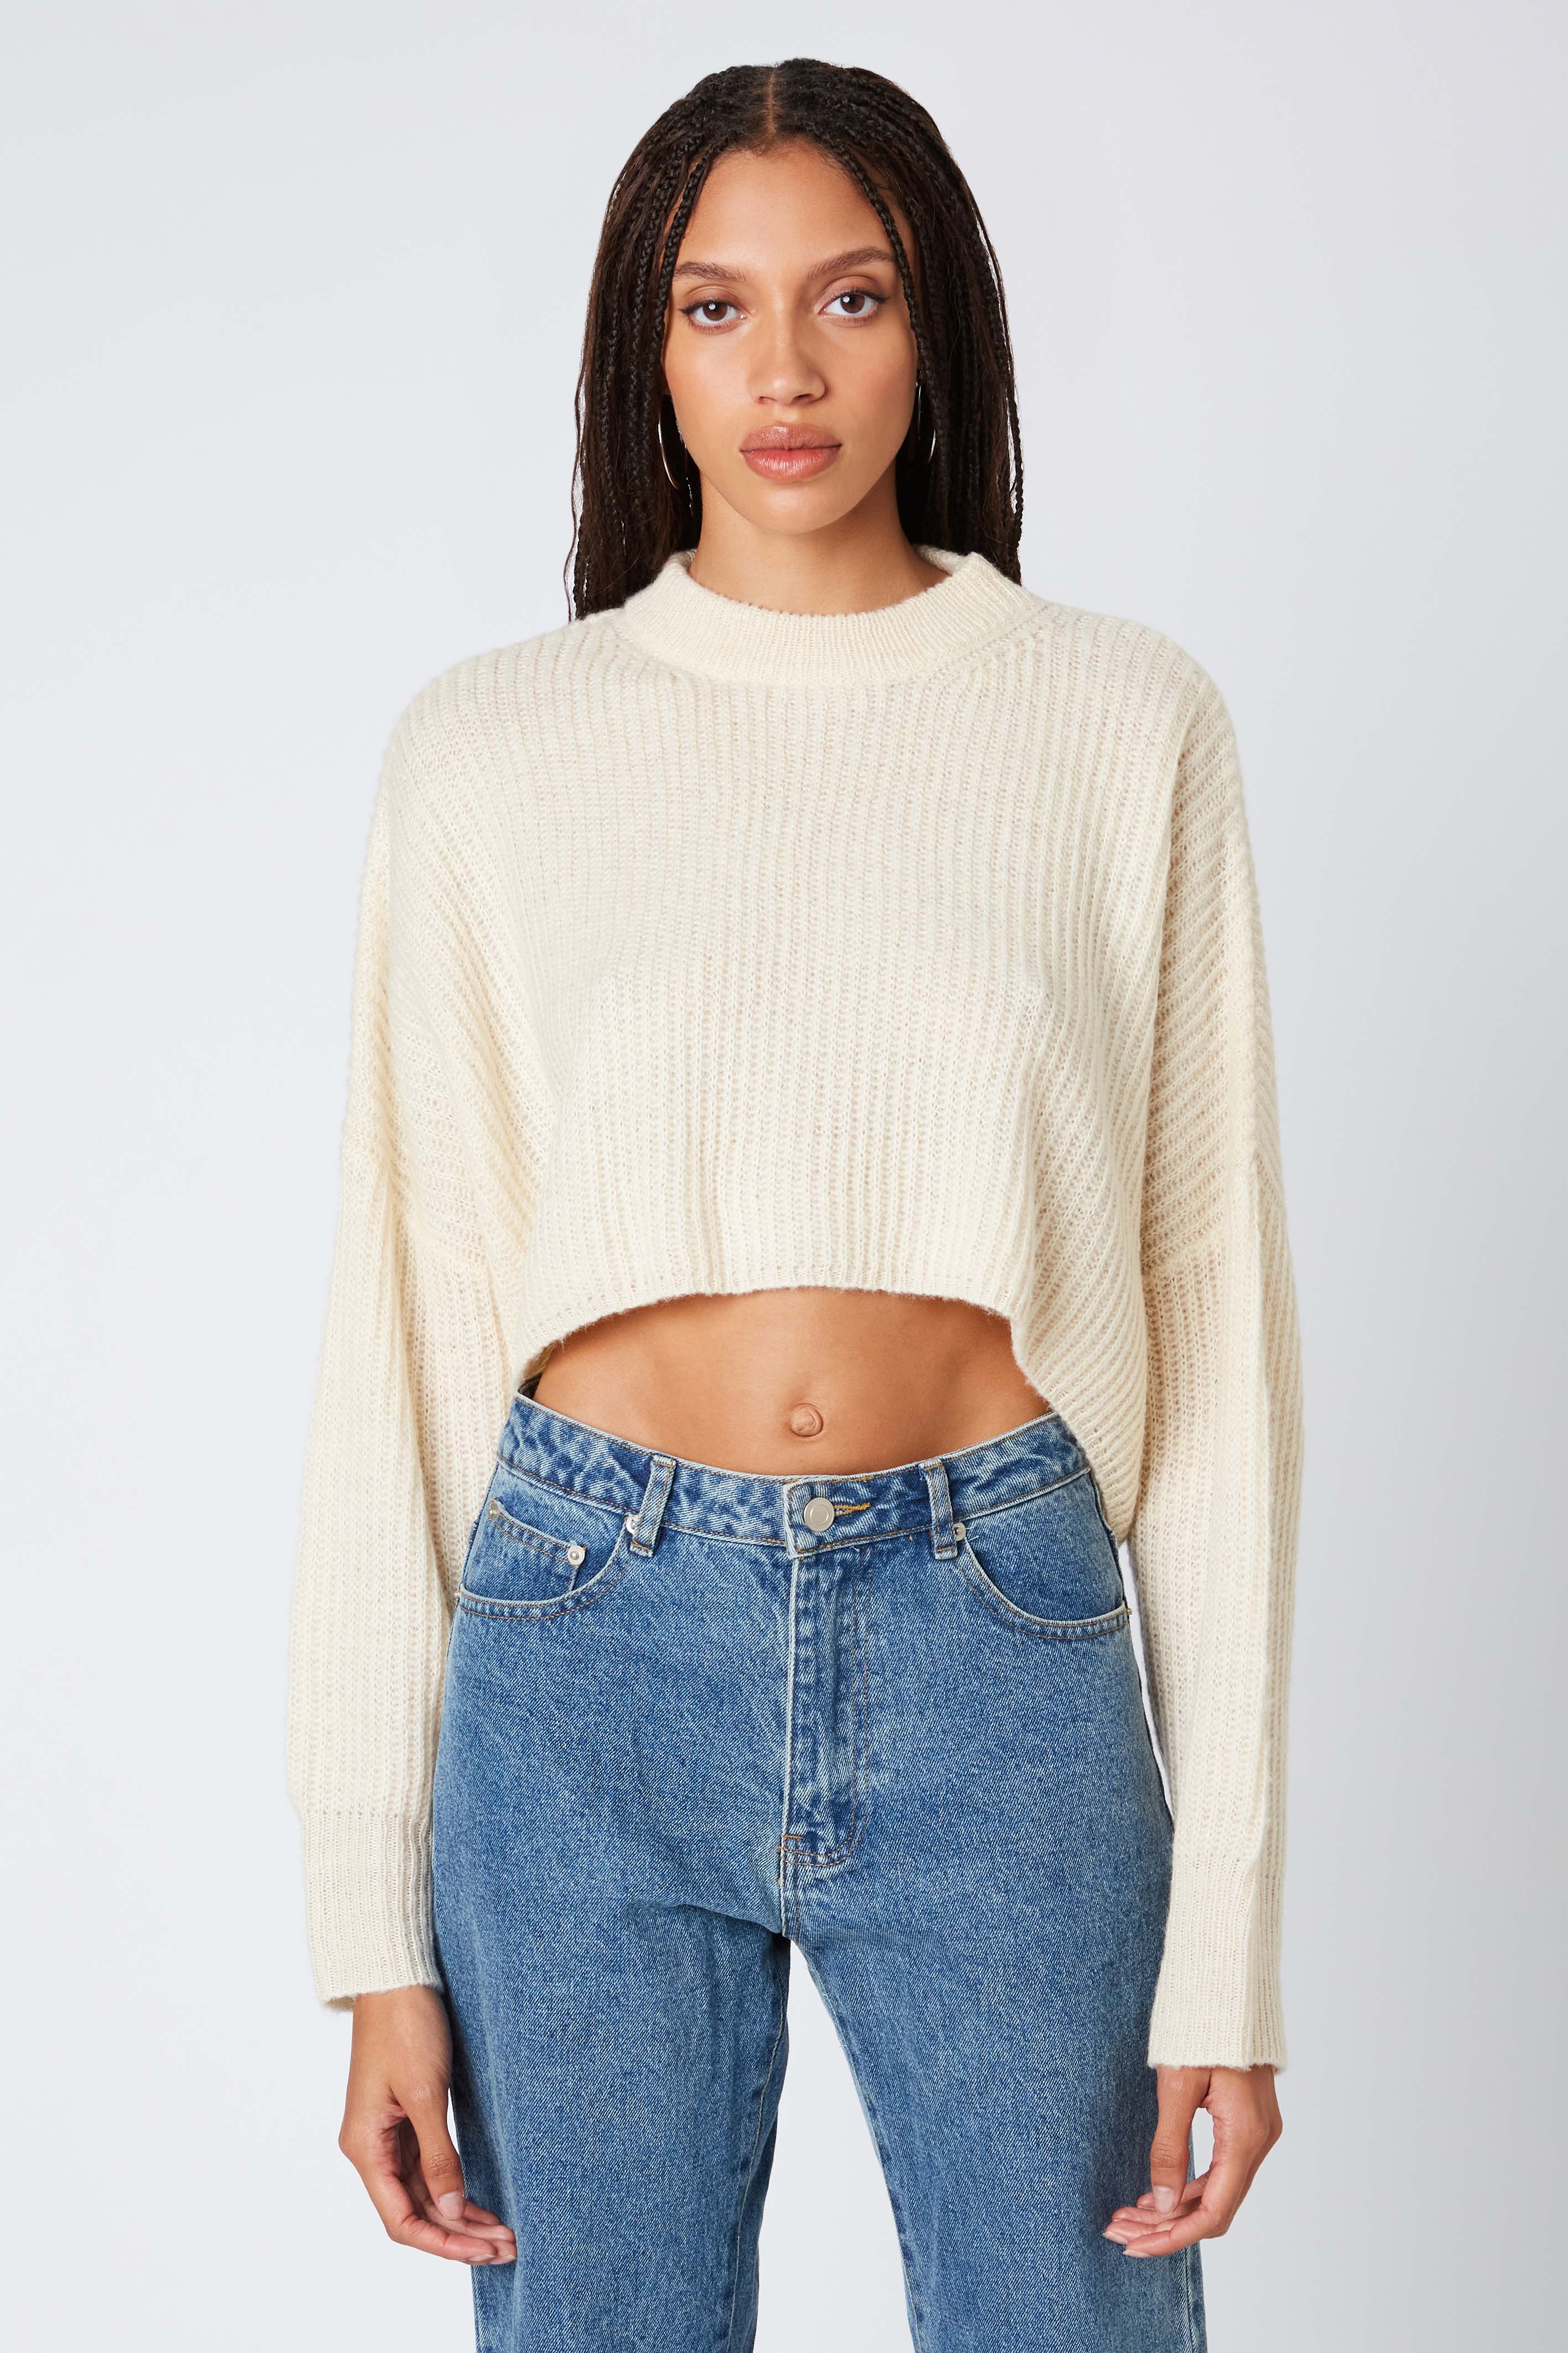 Cropped Mockneck Sweater in Ivory Front View